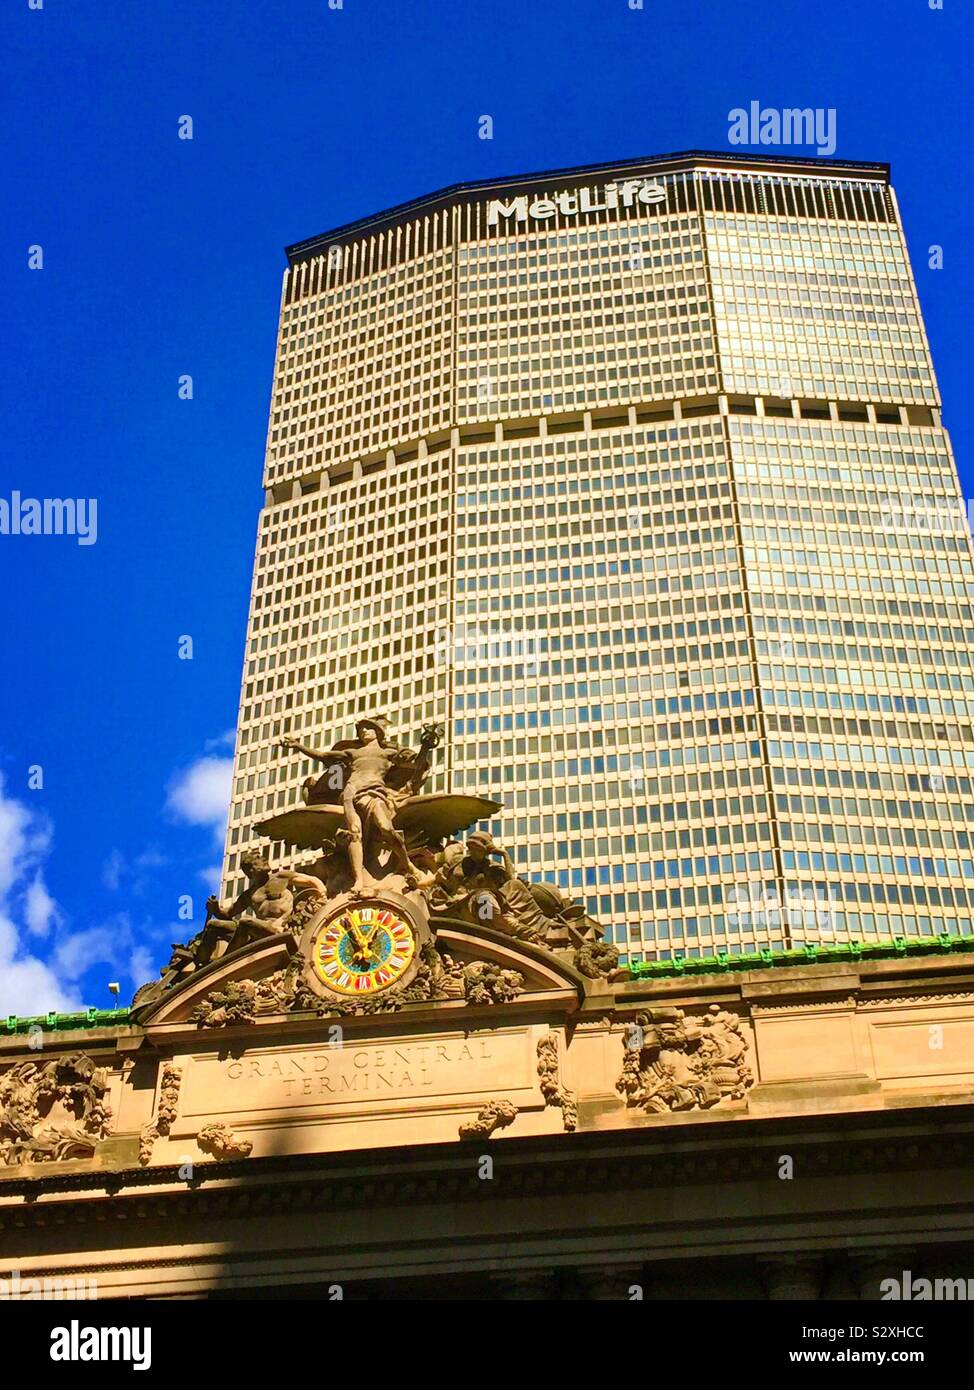 Grand Central terminal has the iconic mercury statue and Tiffany clock, NYC, USA Stock Photo